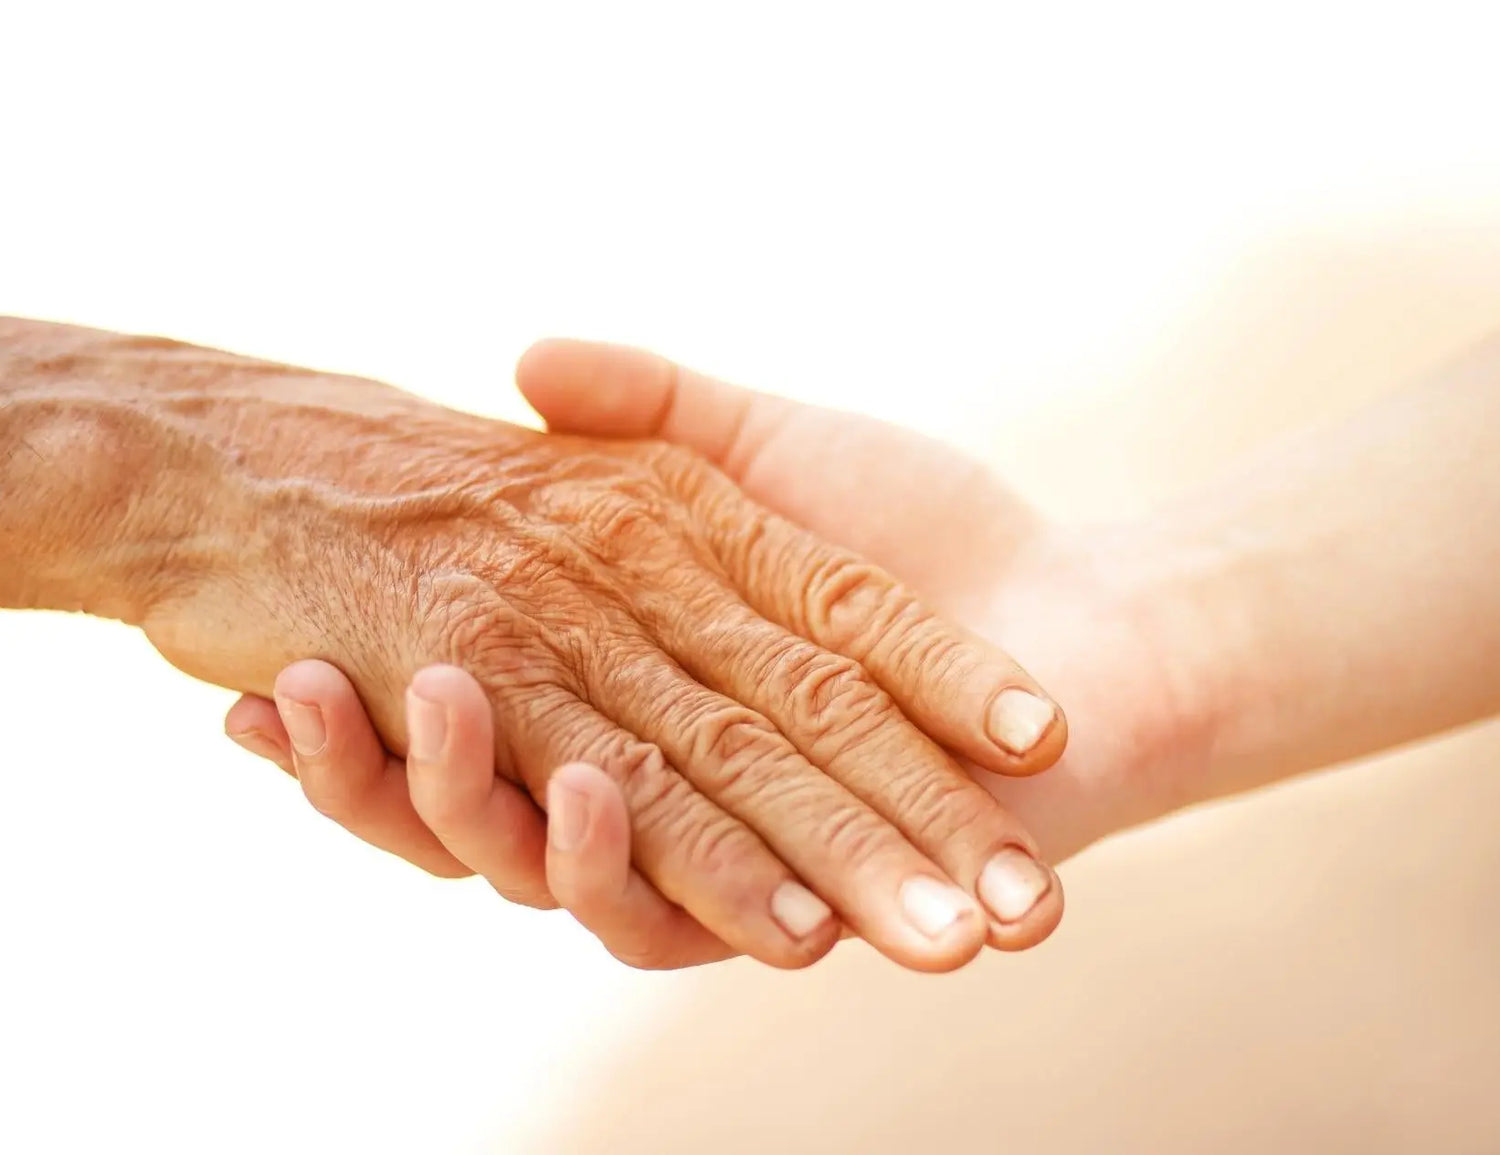 Family Caregiving Guide: Caring for a Loved One - MOBI USA